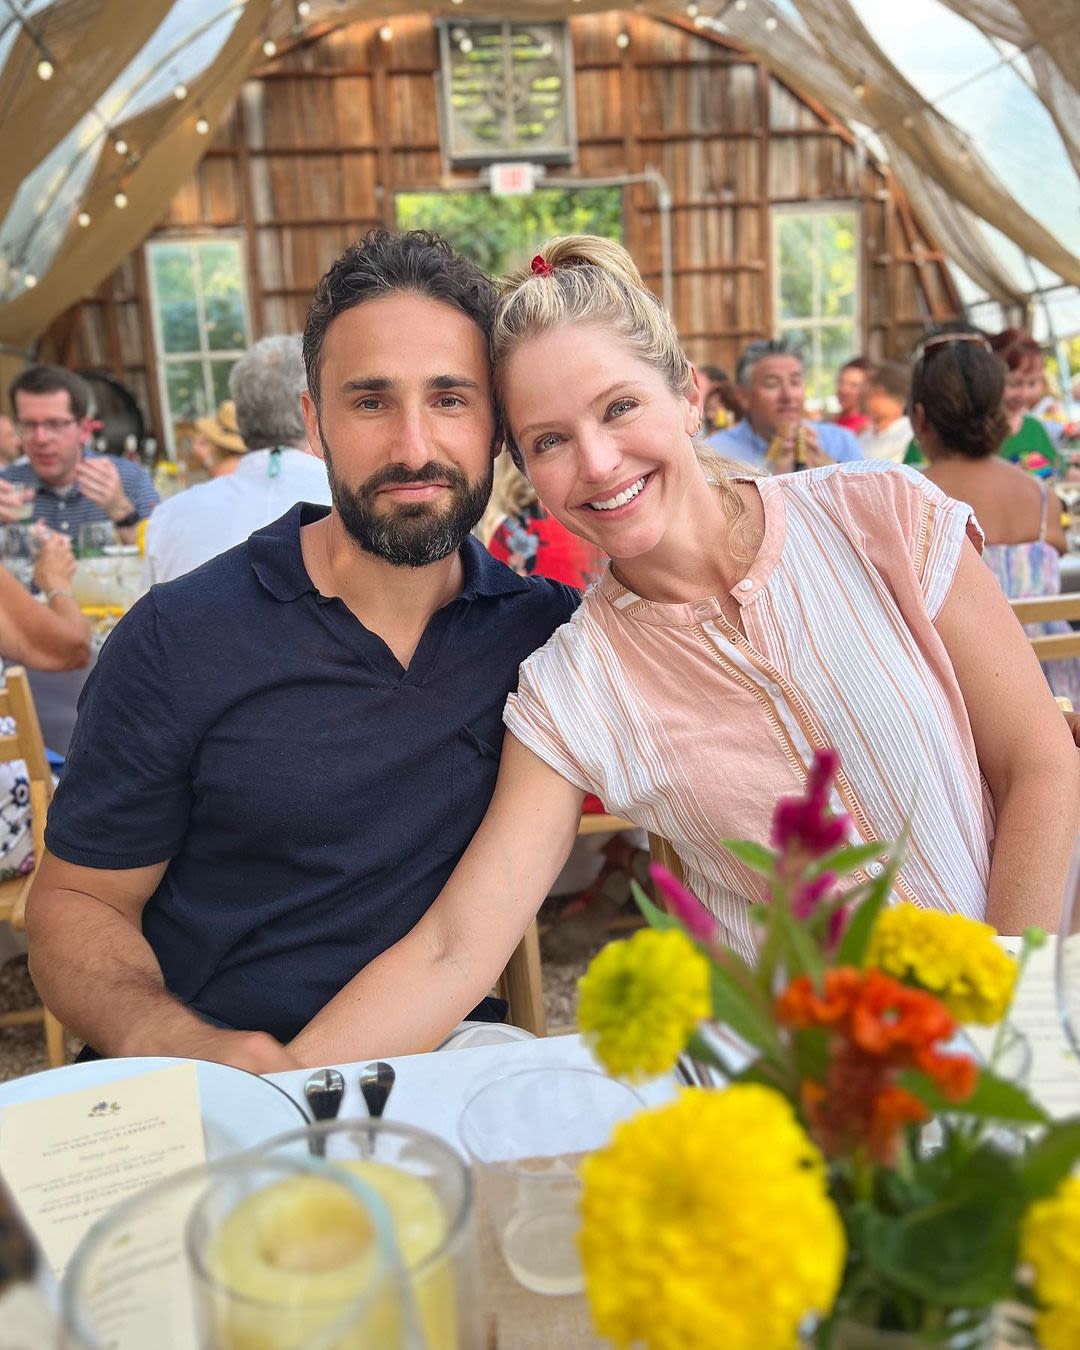 Sara Haines Reflects on Romantic Vacation With Husband Max Shifrin: ‘We Didn’t Fight Once’